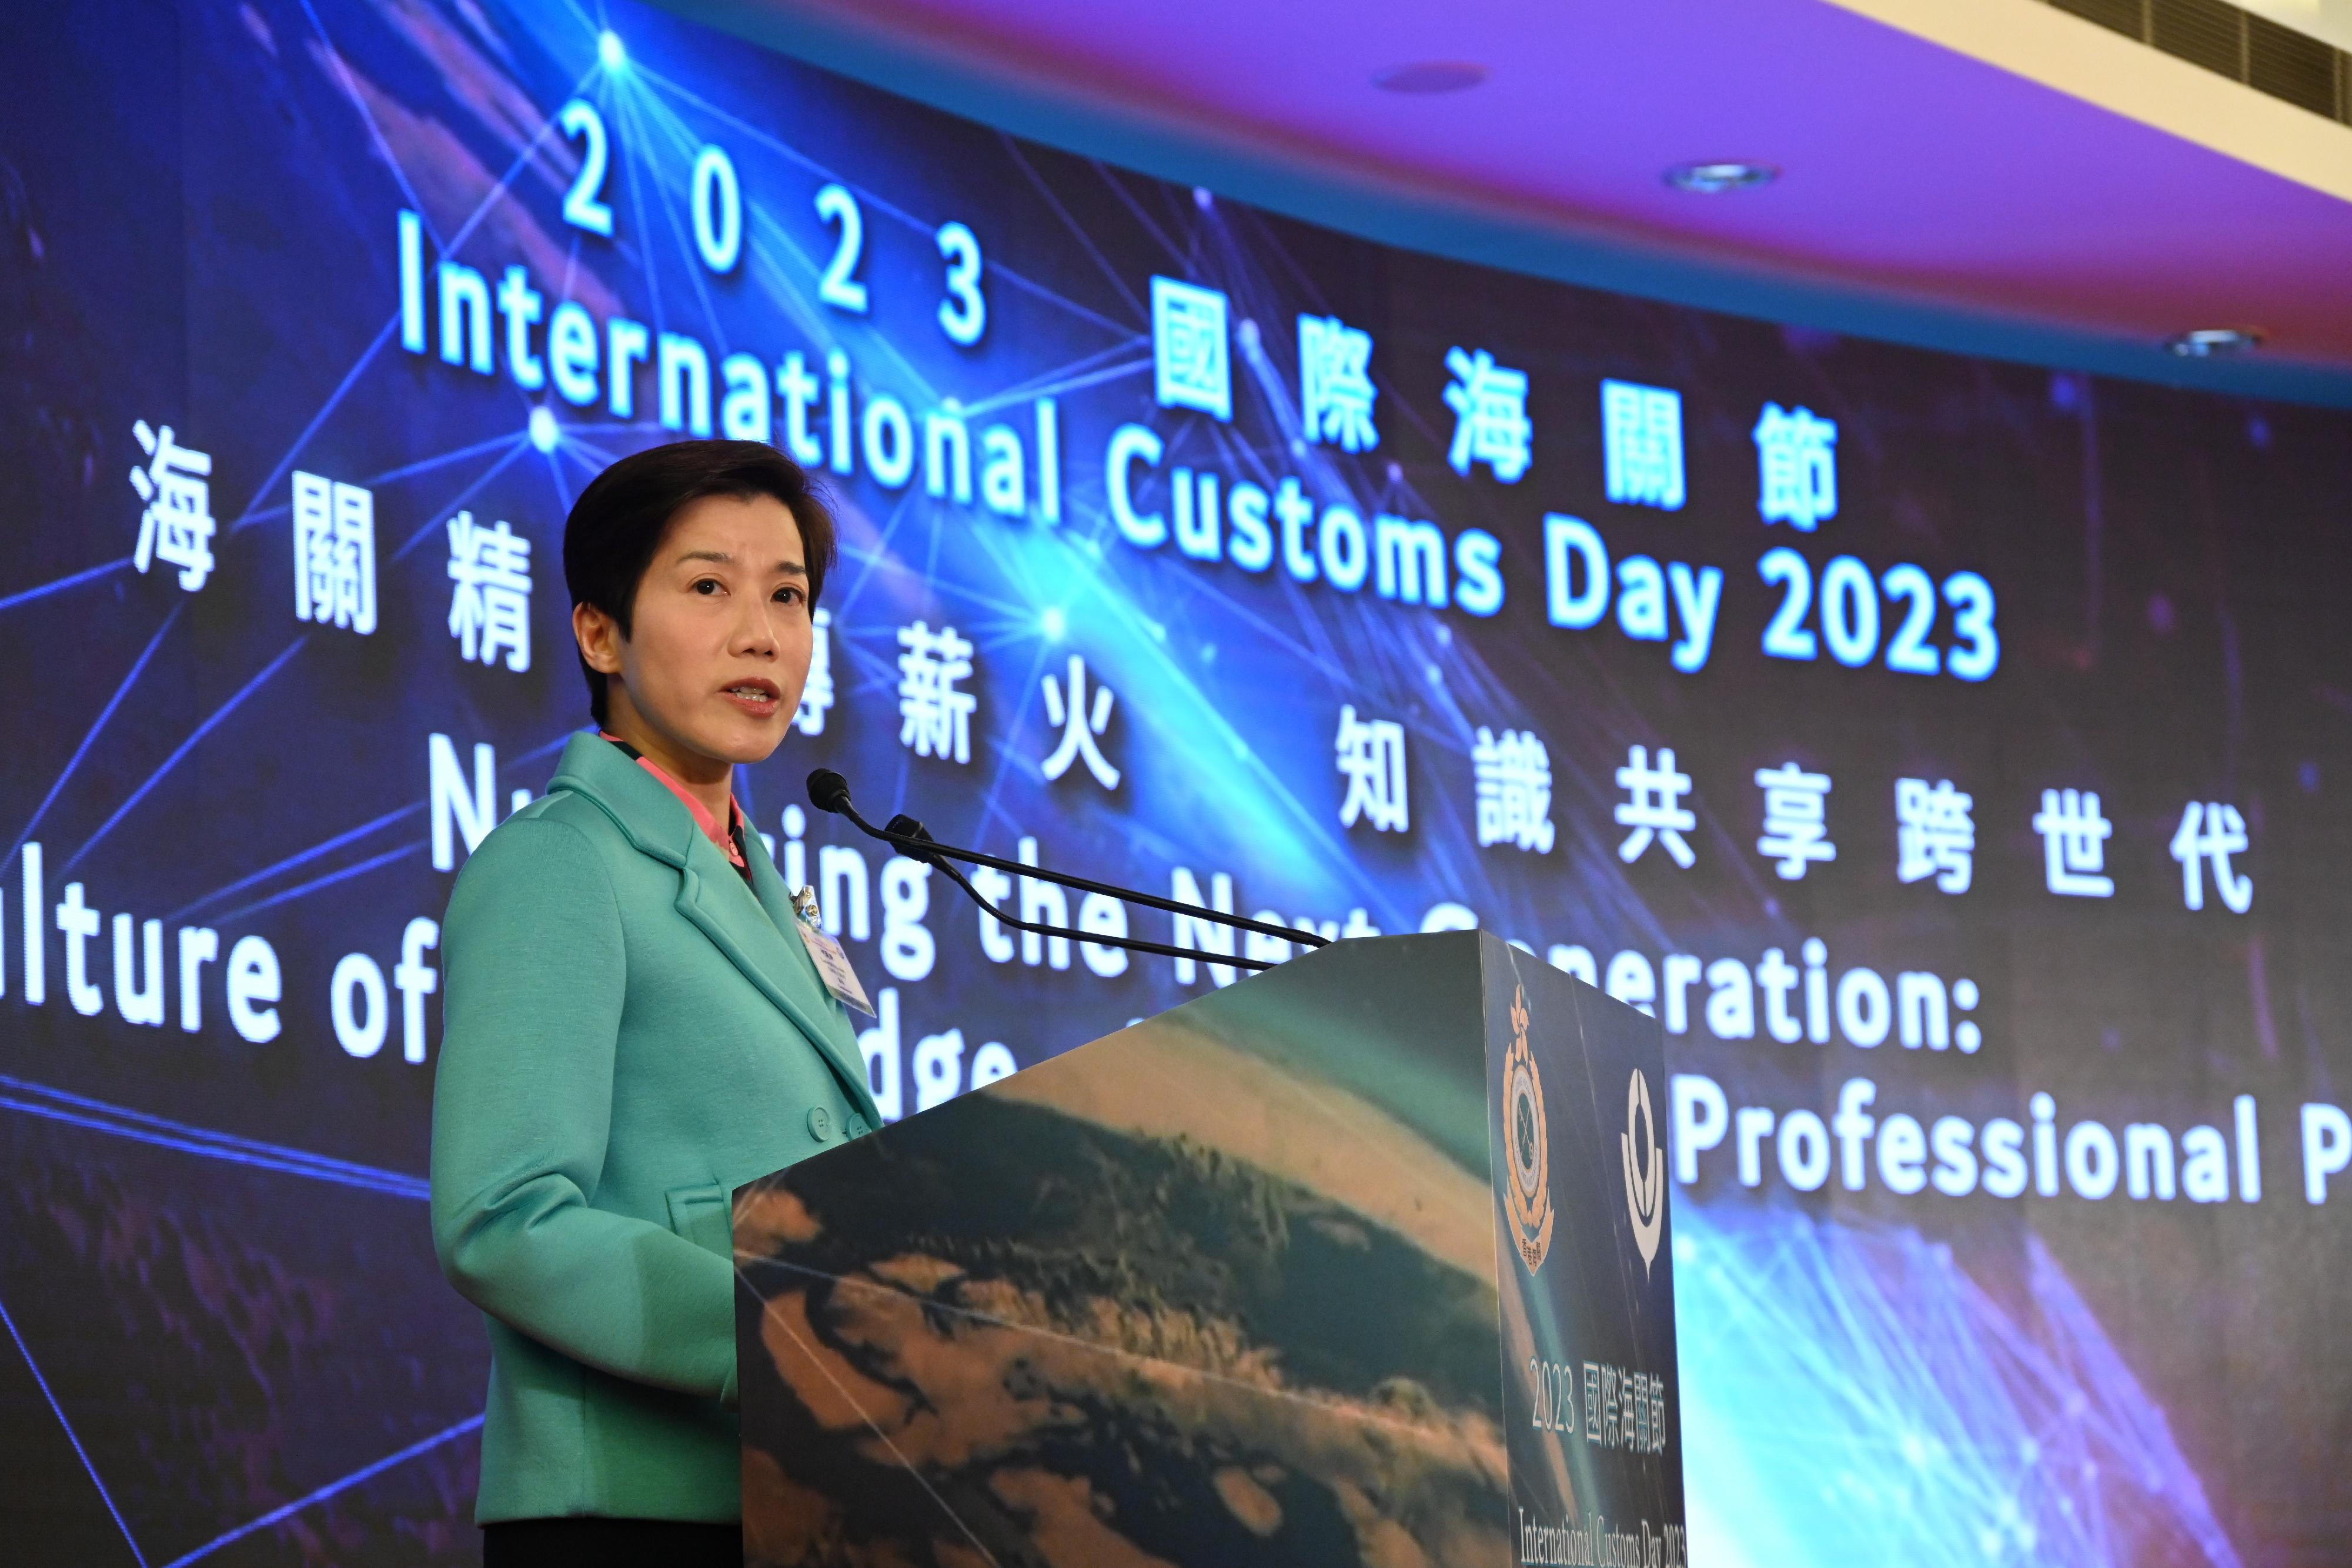 Officiated by the Chief Secretary for Administration, Mr Chan Kwok-ki, and the Commissioner of Customs and Excise, Ms Louise Ho, a ceremony in celebration of the International Customs Day 2023 was held by Hong Kong Customs at the Customs Headquarters Building today (February 2). Photo shows the Commissioner of Customs and Excise, Ms Louise Ho, speaking at the celebration ceremony.